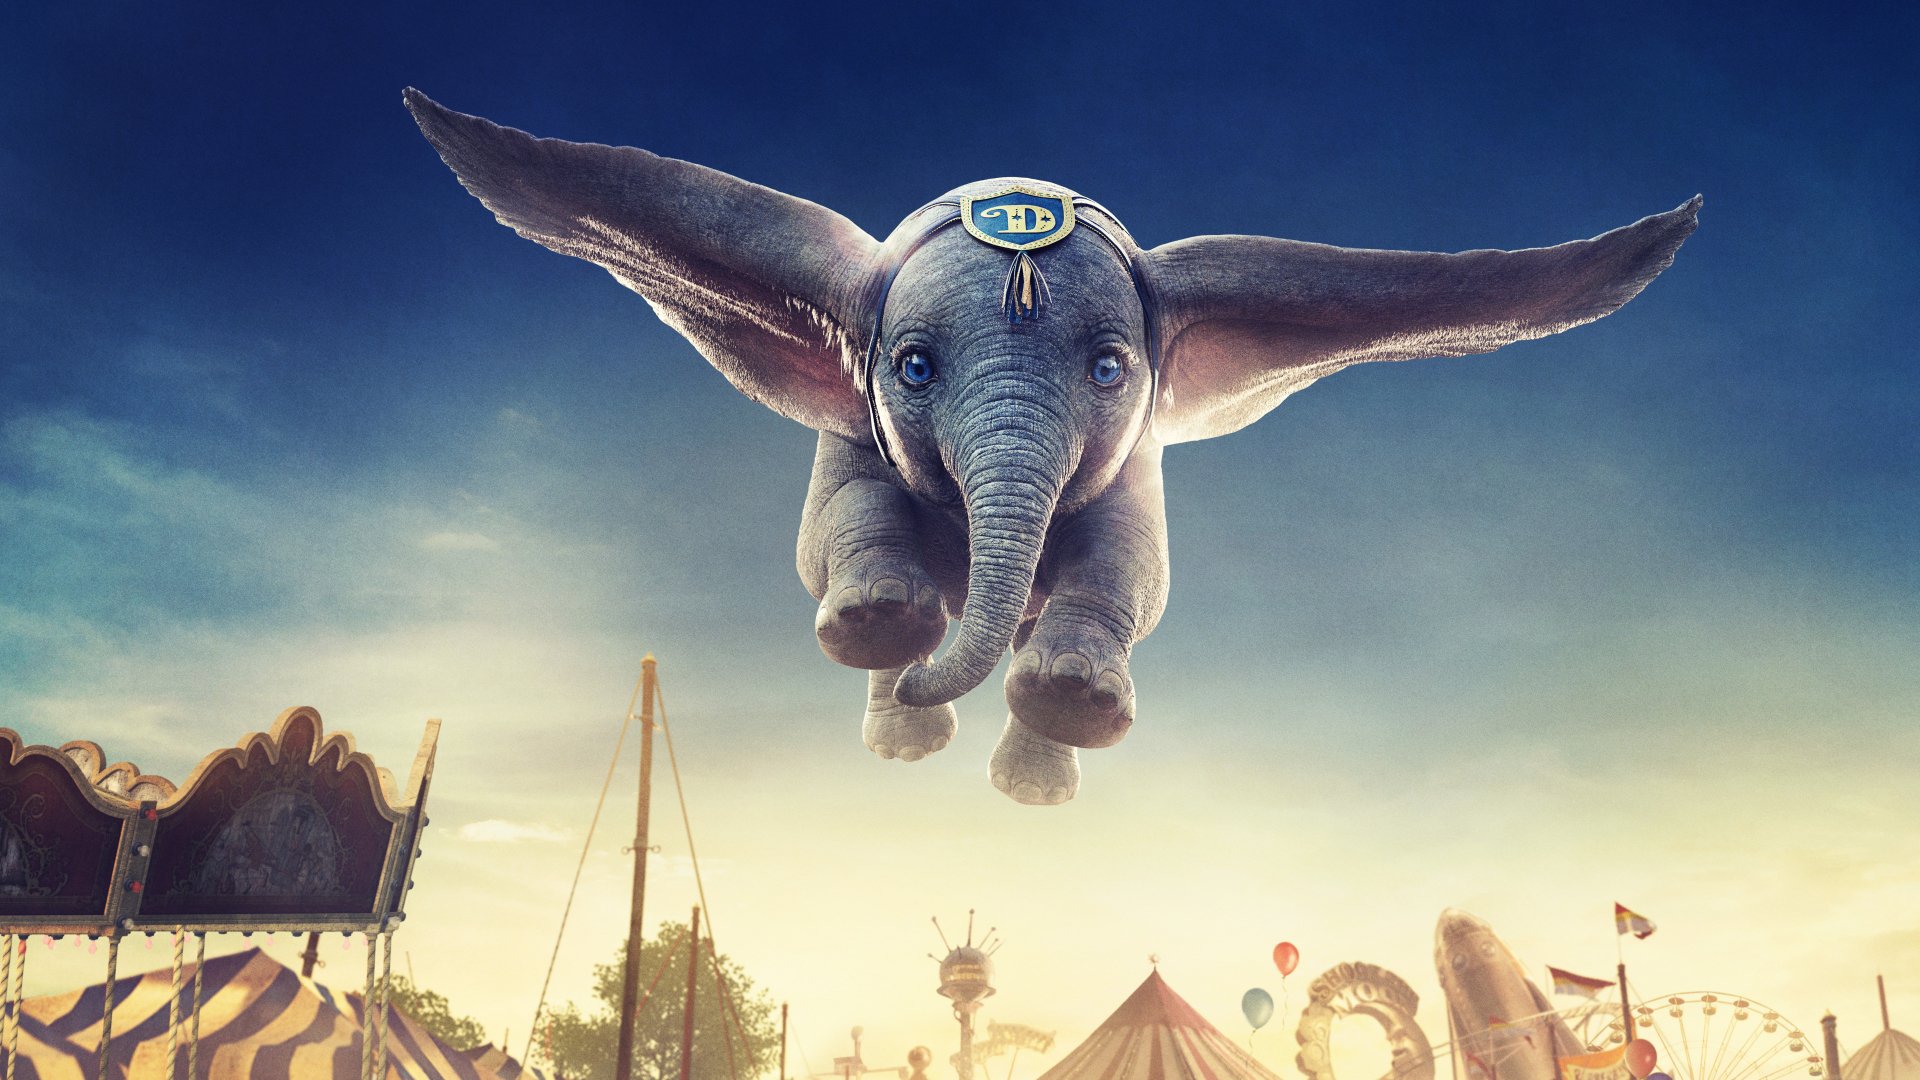 Dumbo 2019 HD Wallpapers and Backgrounds